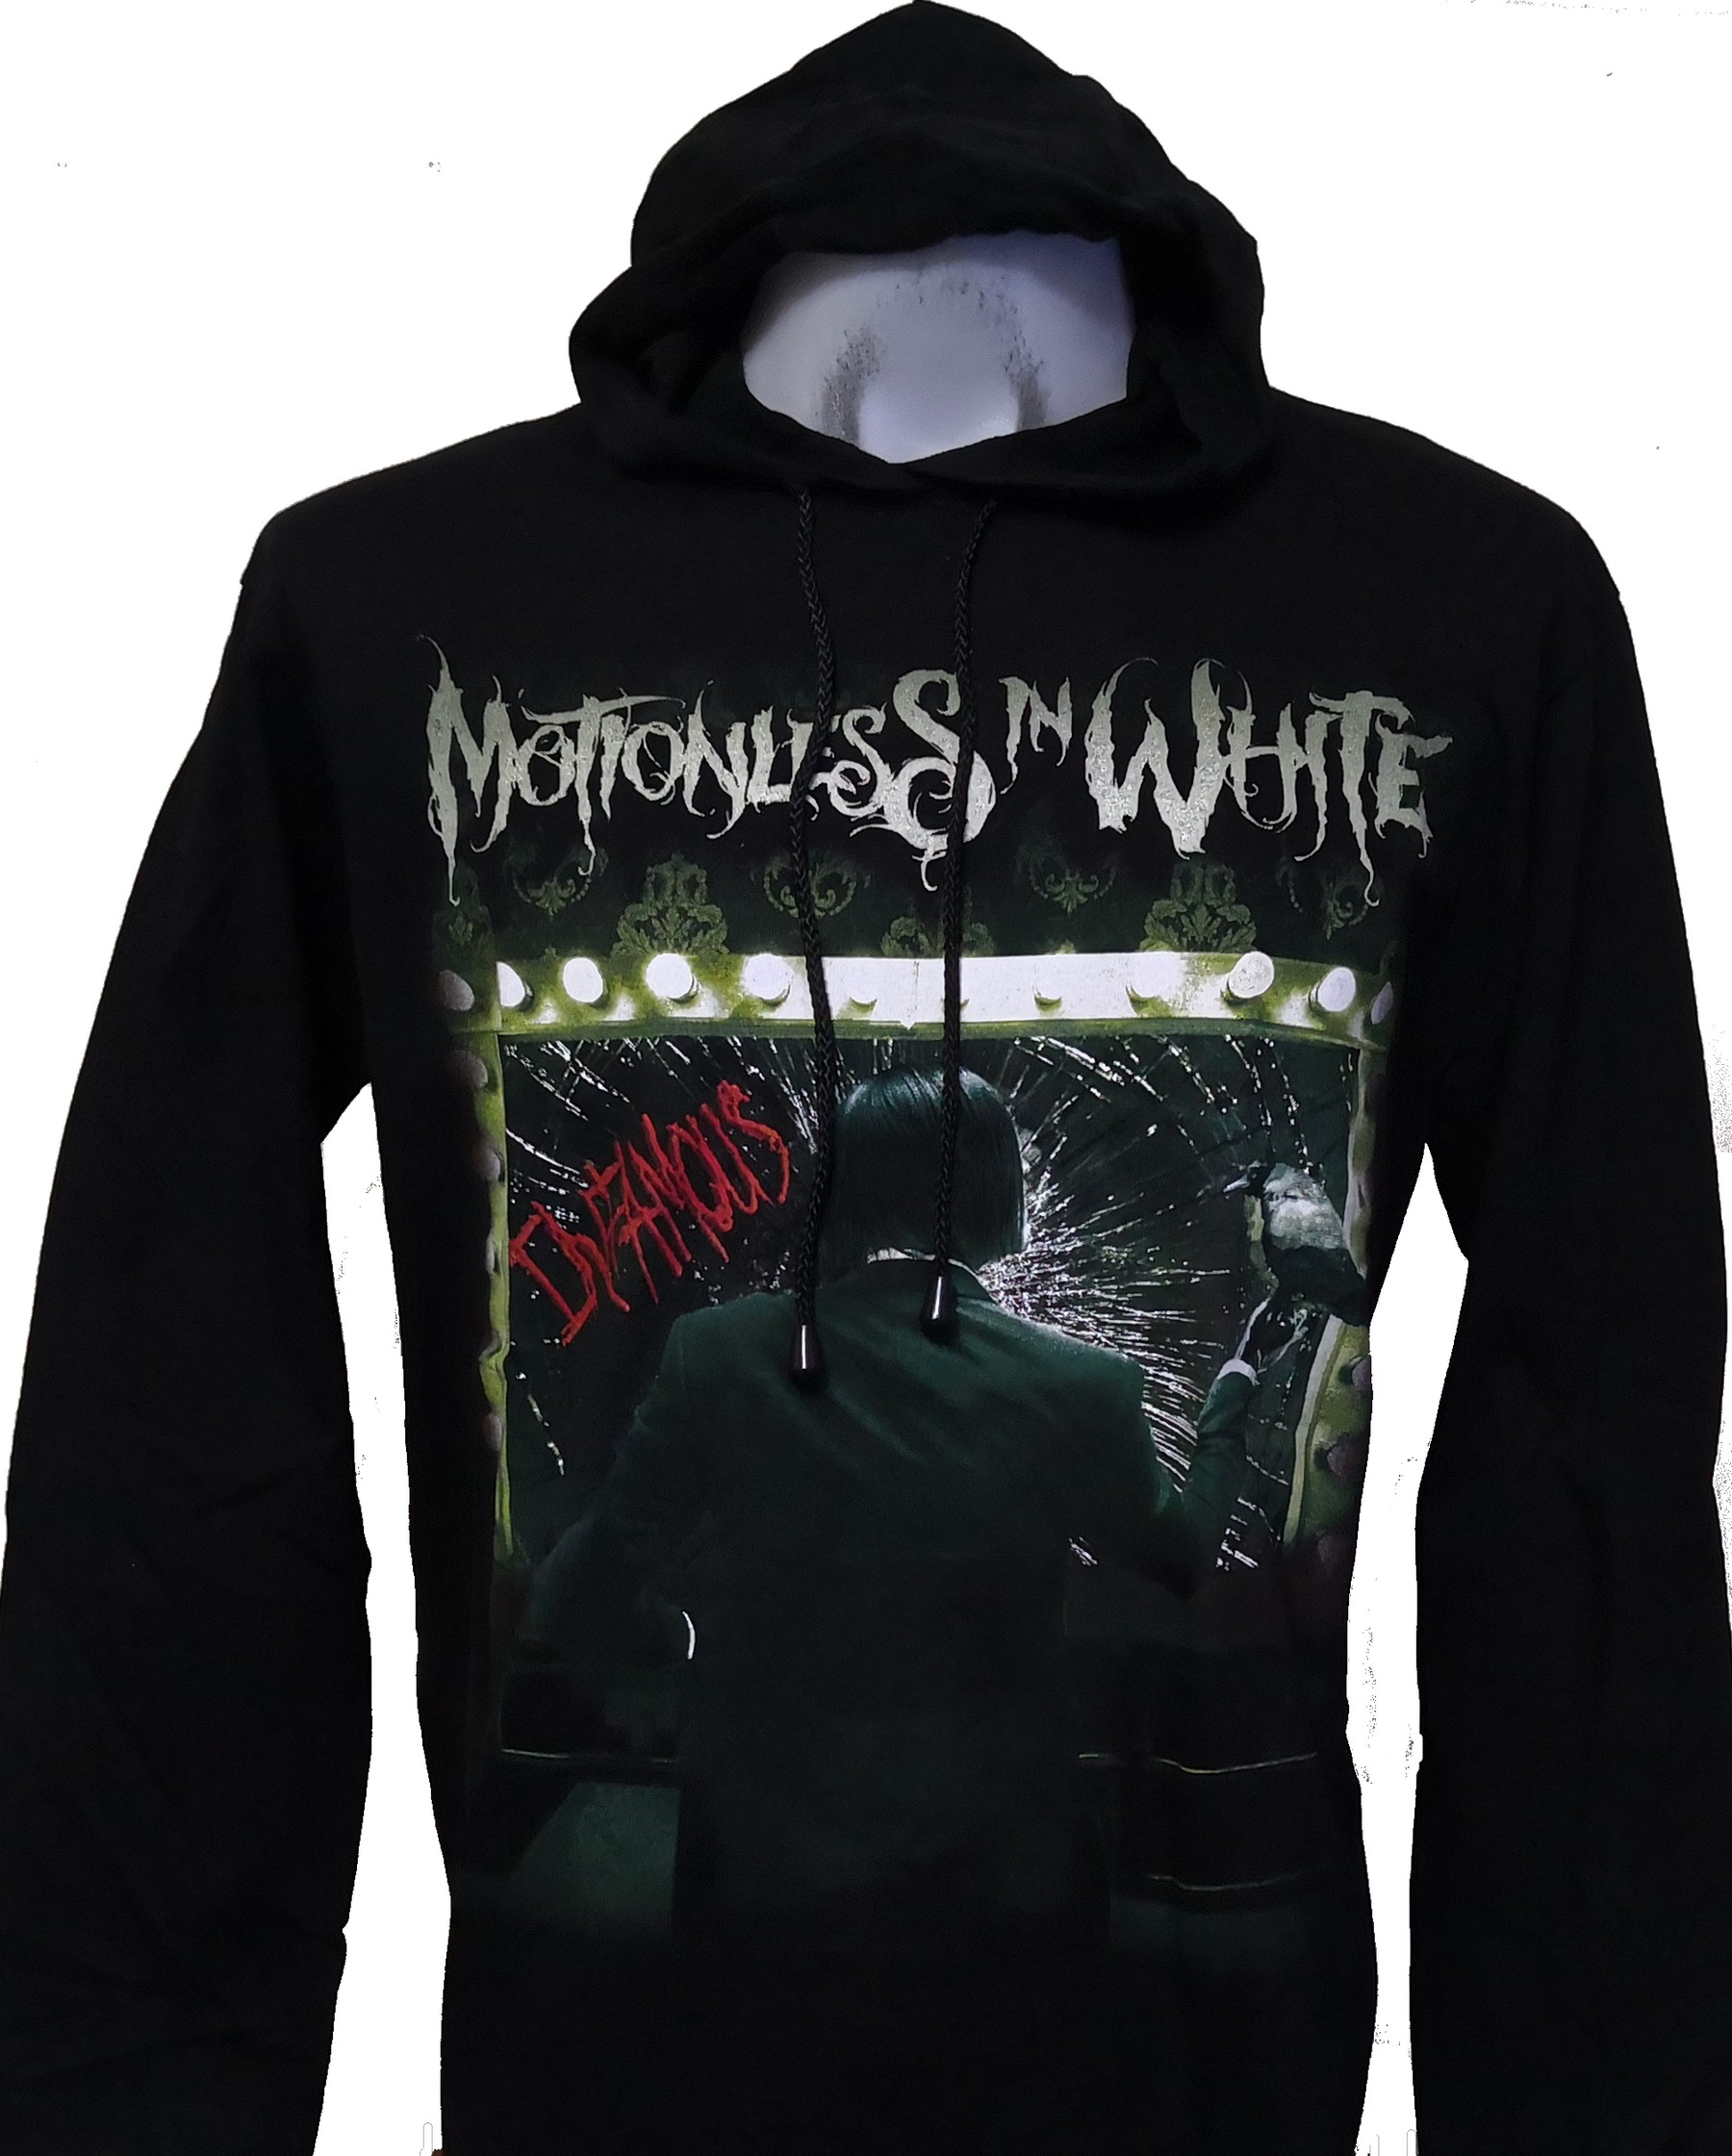 MOTIONLESS IN WHITE 1 LONG SLEEVES T SHIRT Black All Size 